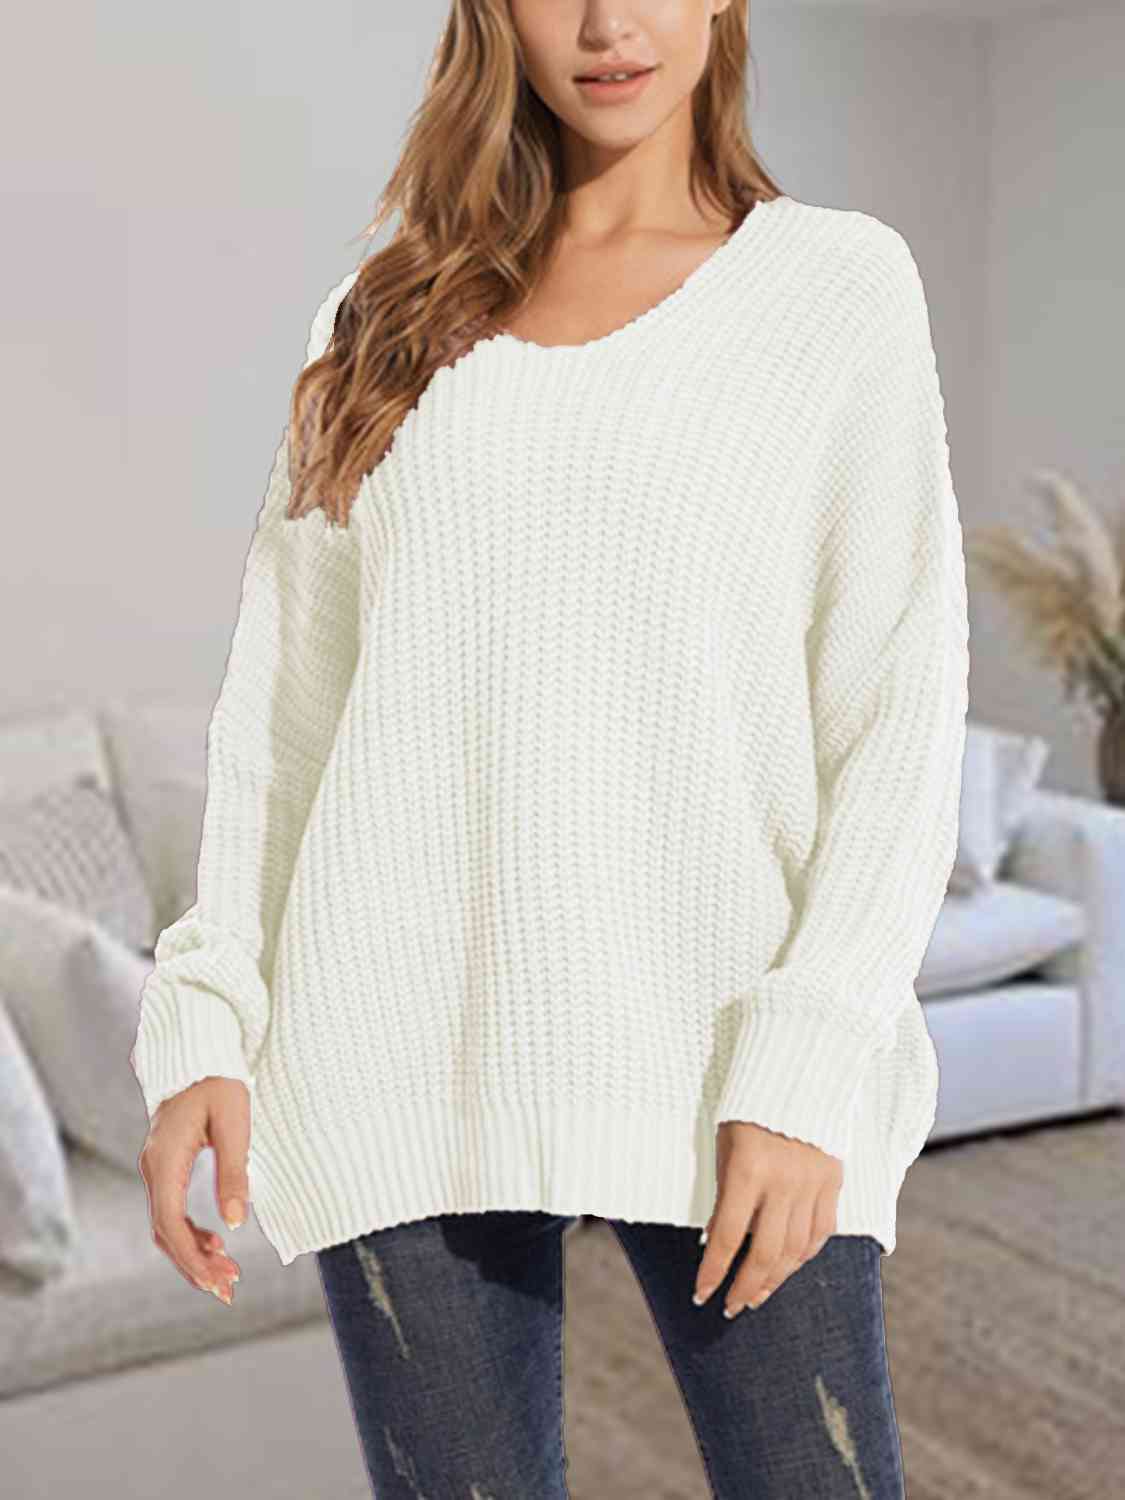 Gray V-Neck Batwing Dropped Shoulder Sweater Sentient Beauty Fashions Apparel & Accessories